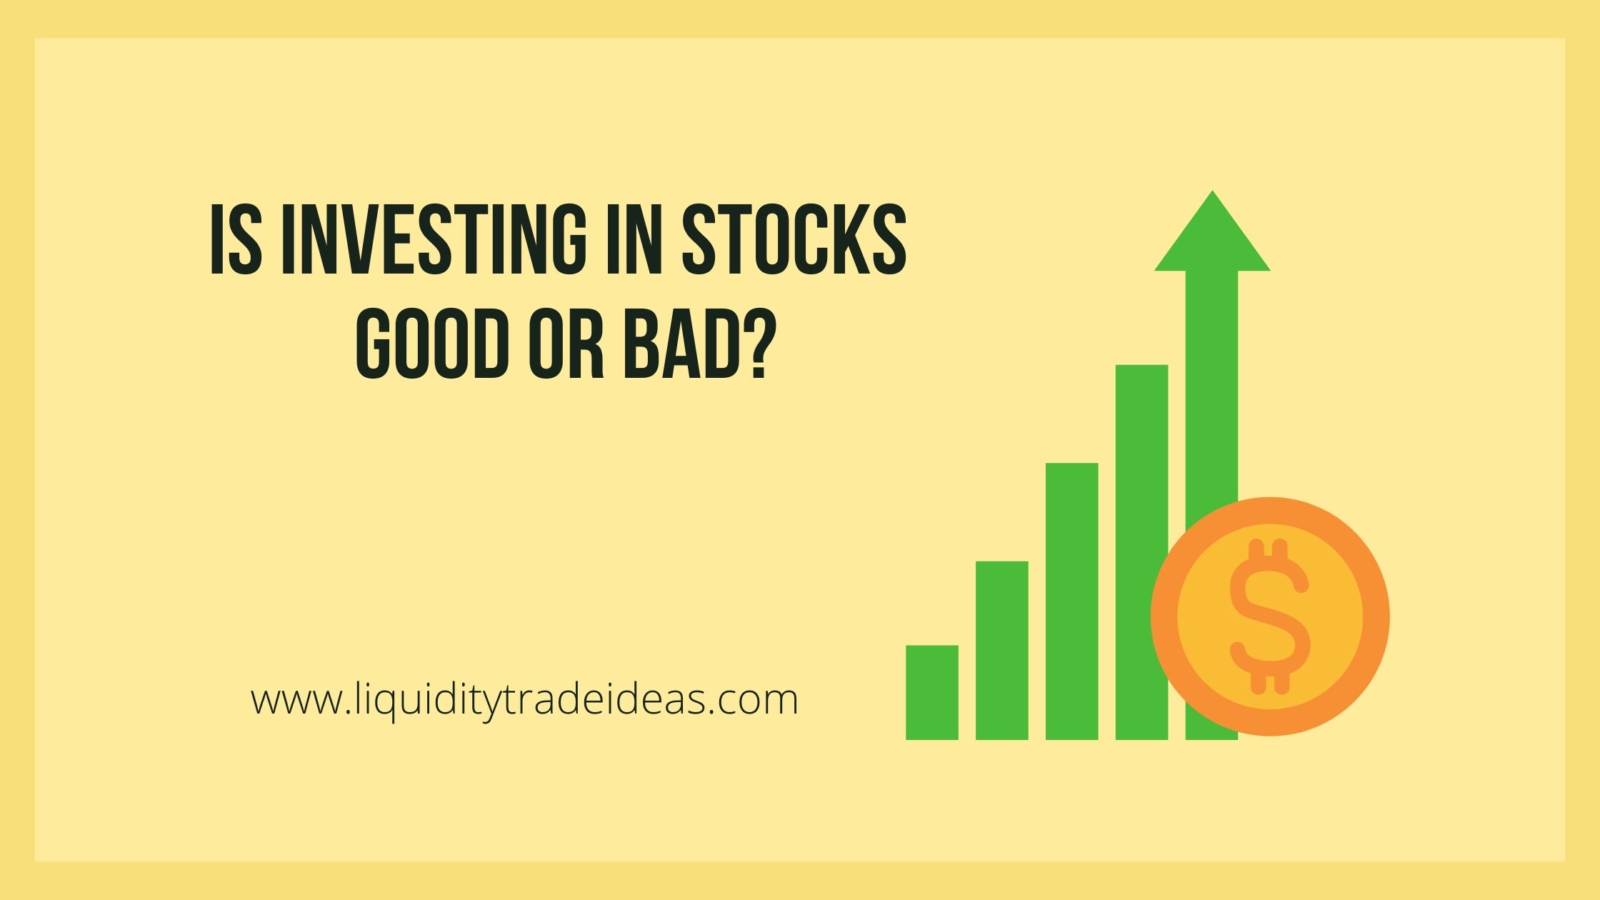 Is investing in stocks good or bad?